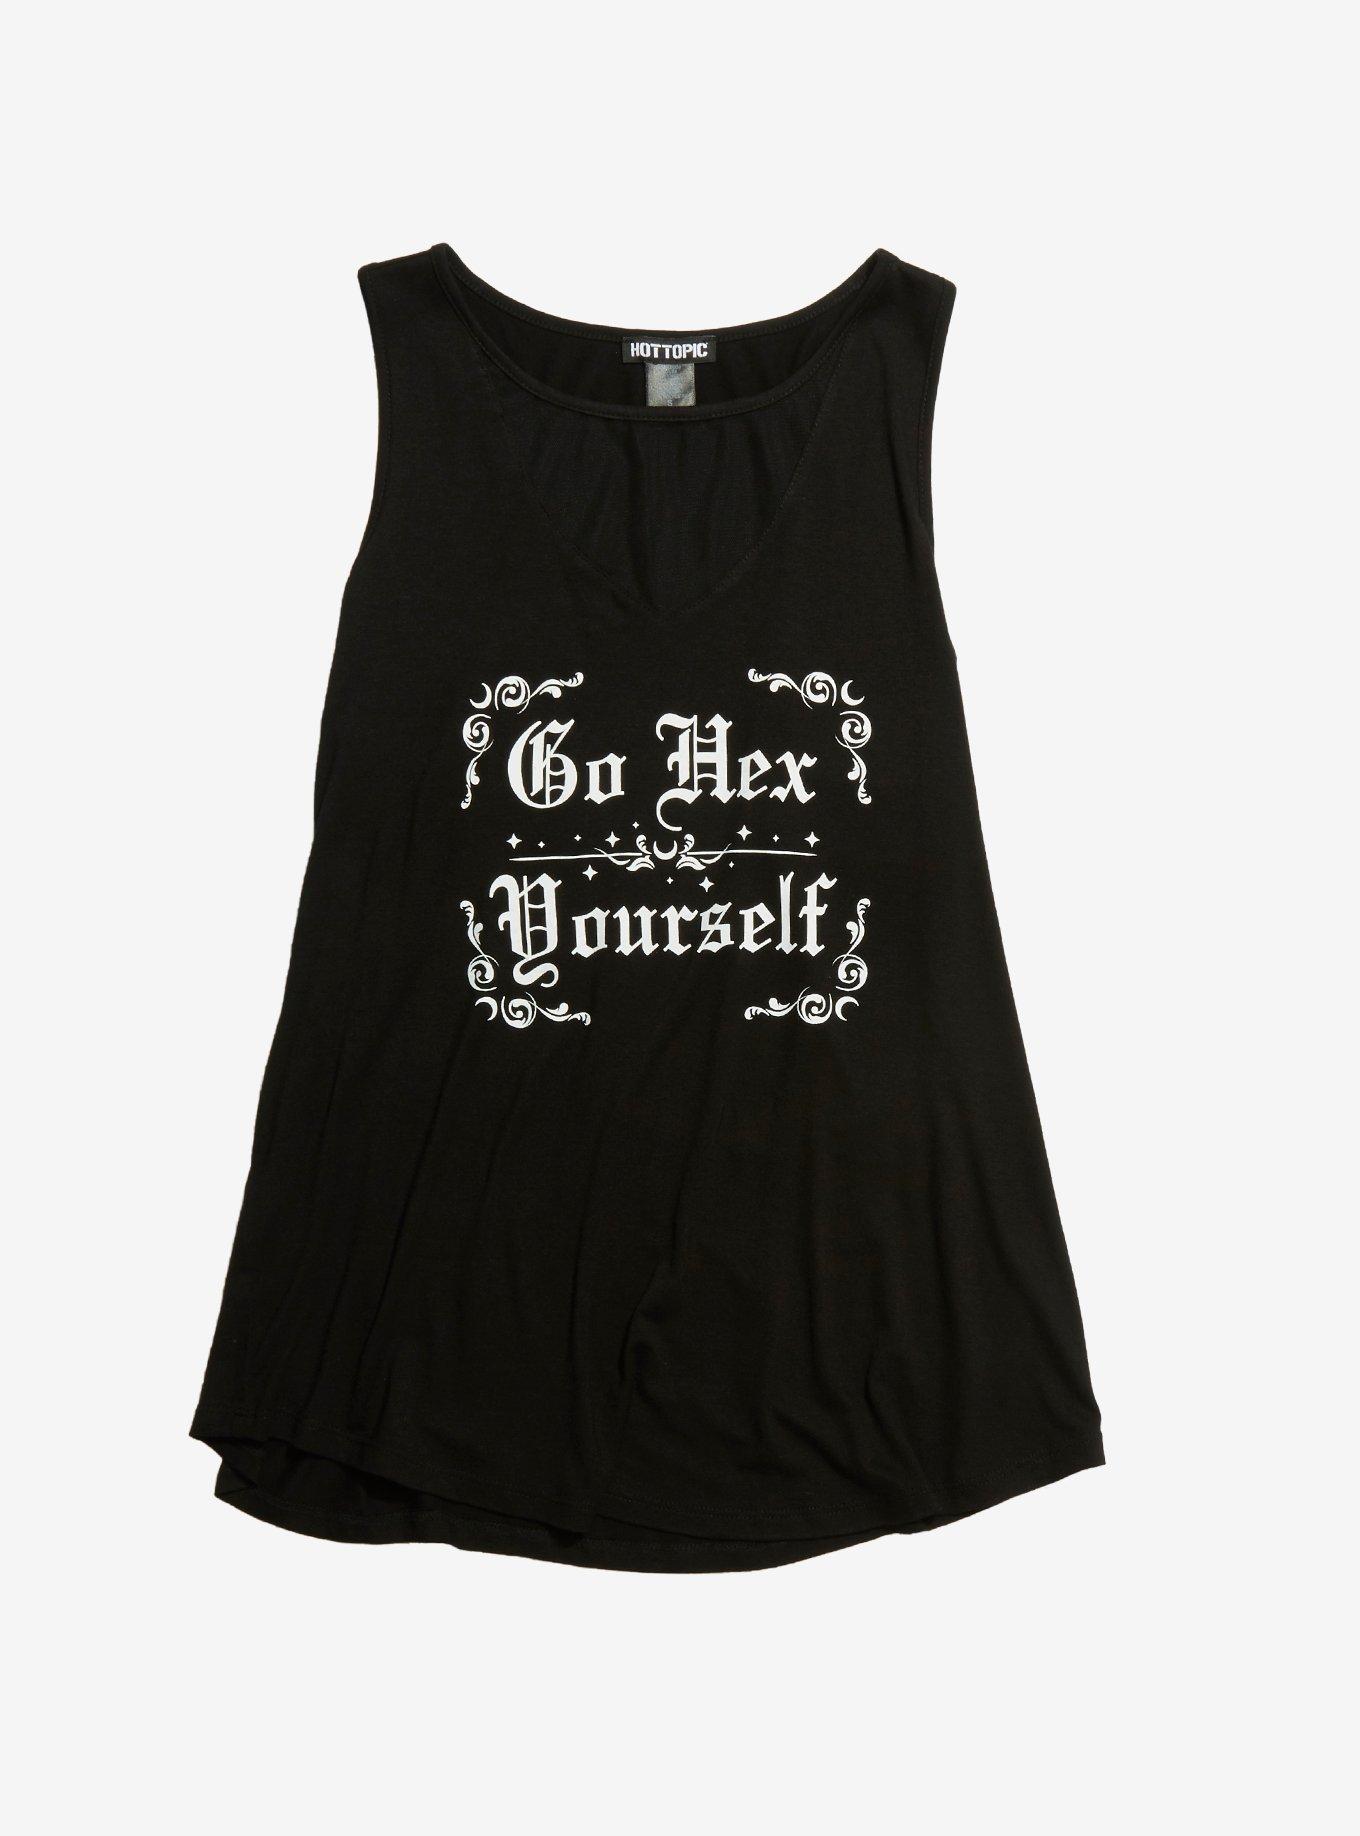 Go Hex Yourself Mesh Front Girls Tank Top, WHITE, hi-res